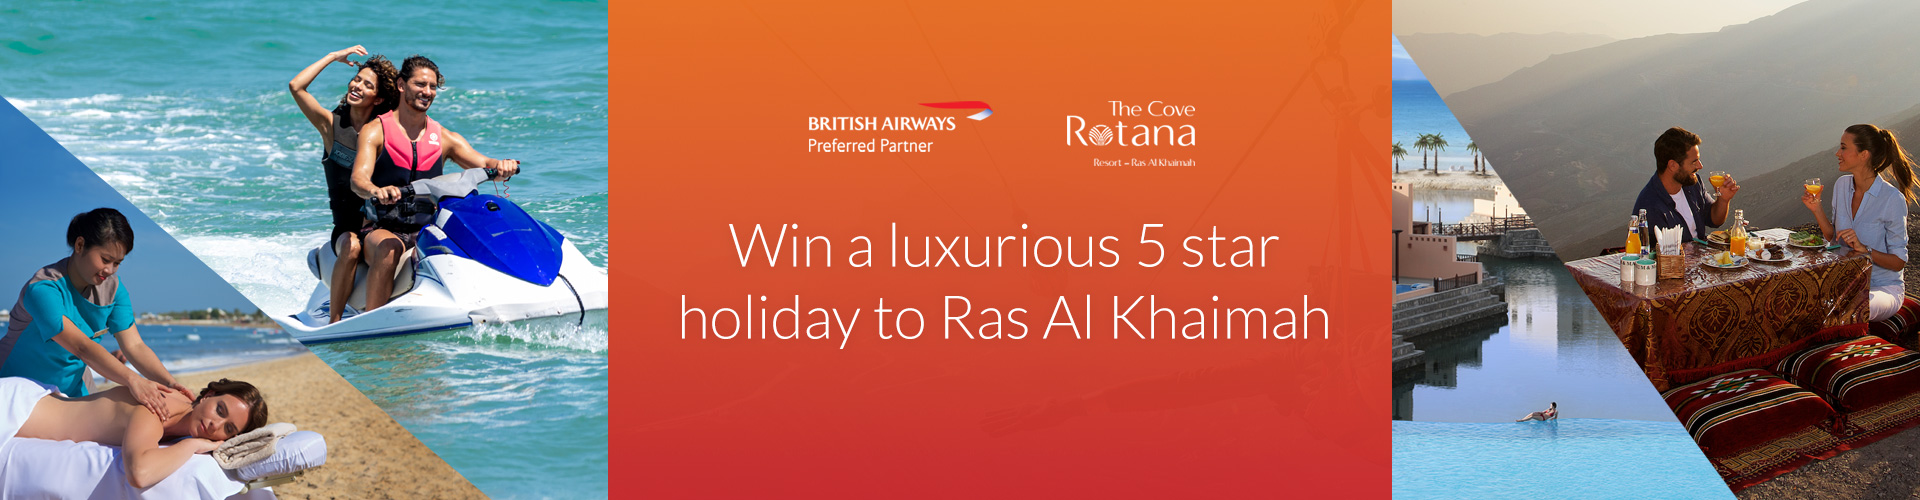 Win A Luxurious 4 Night 5 Star Holiday For 2 To Ras Al Khaimah